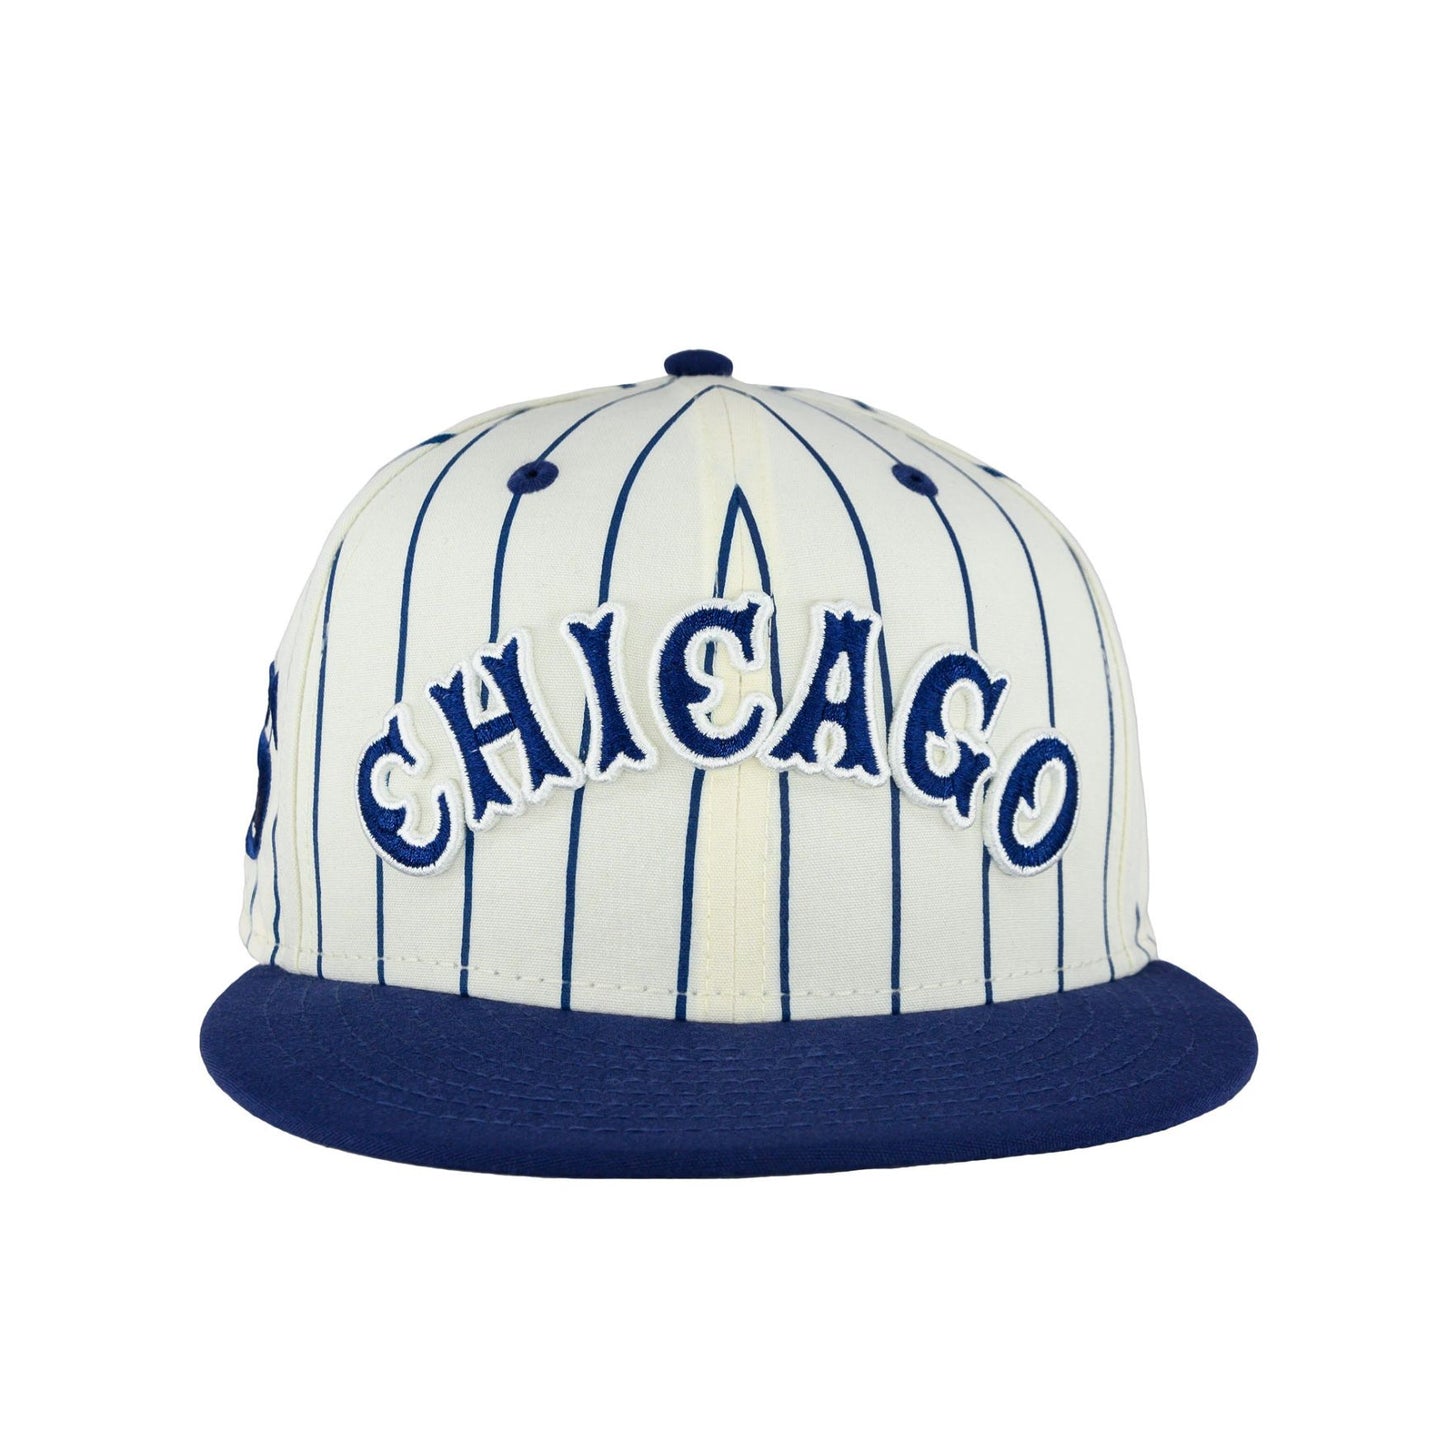 Chicago White Sox Cooperstown 1912 Chrome New Era 9FIFTY Snapback Adjustable Hat